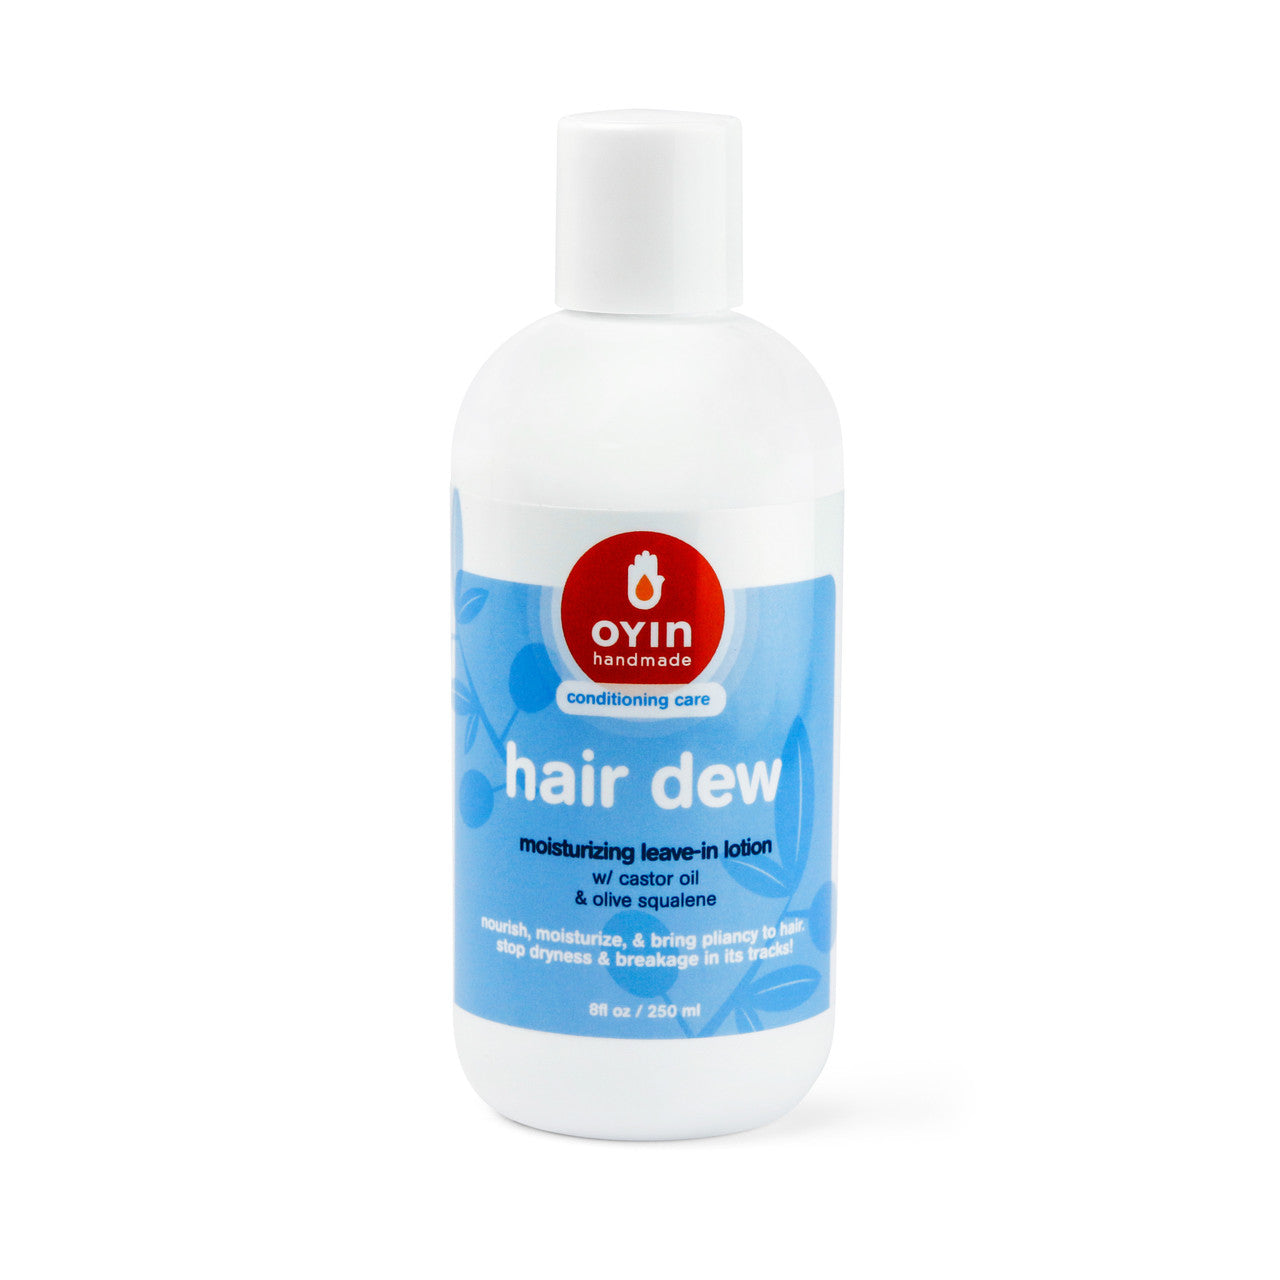 Hair Dew - the leave-in to believe in! Image of product in an 8oz bottle with blue and white label.